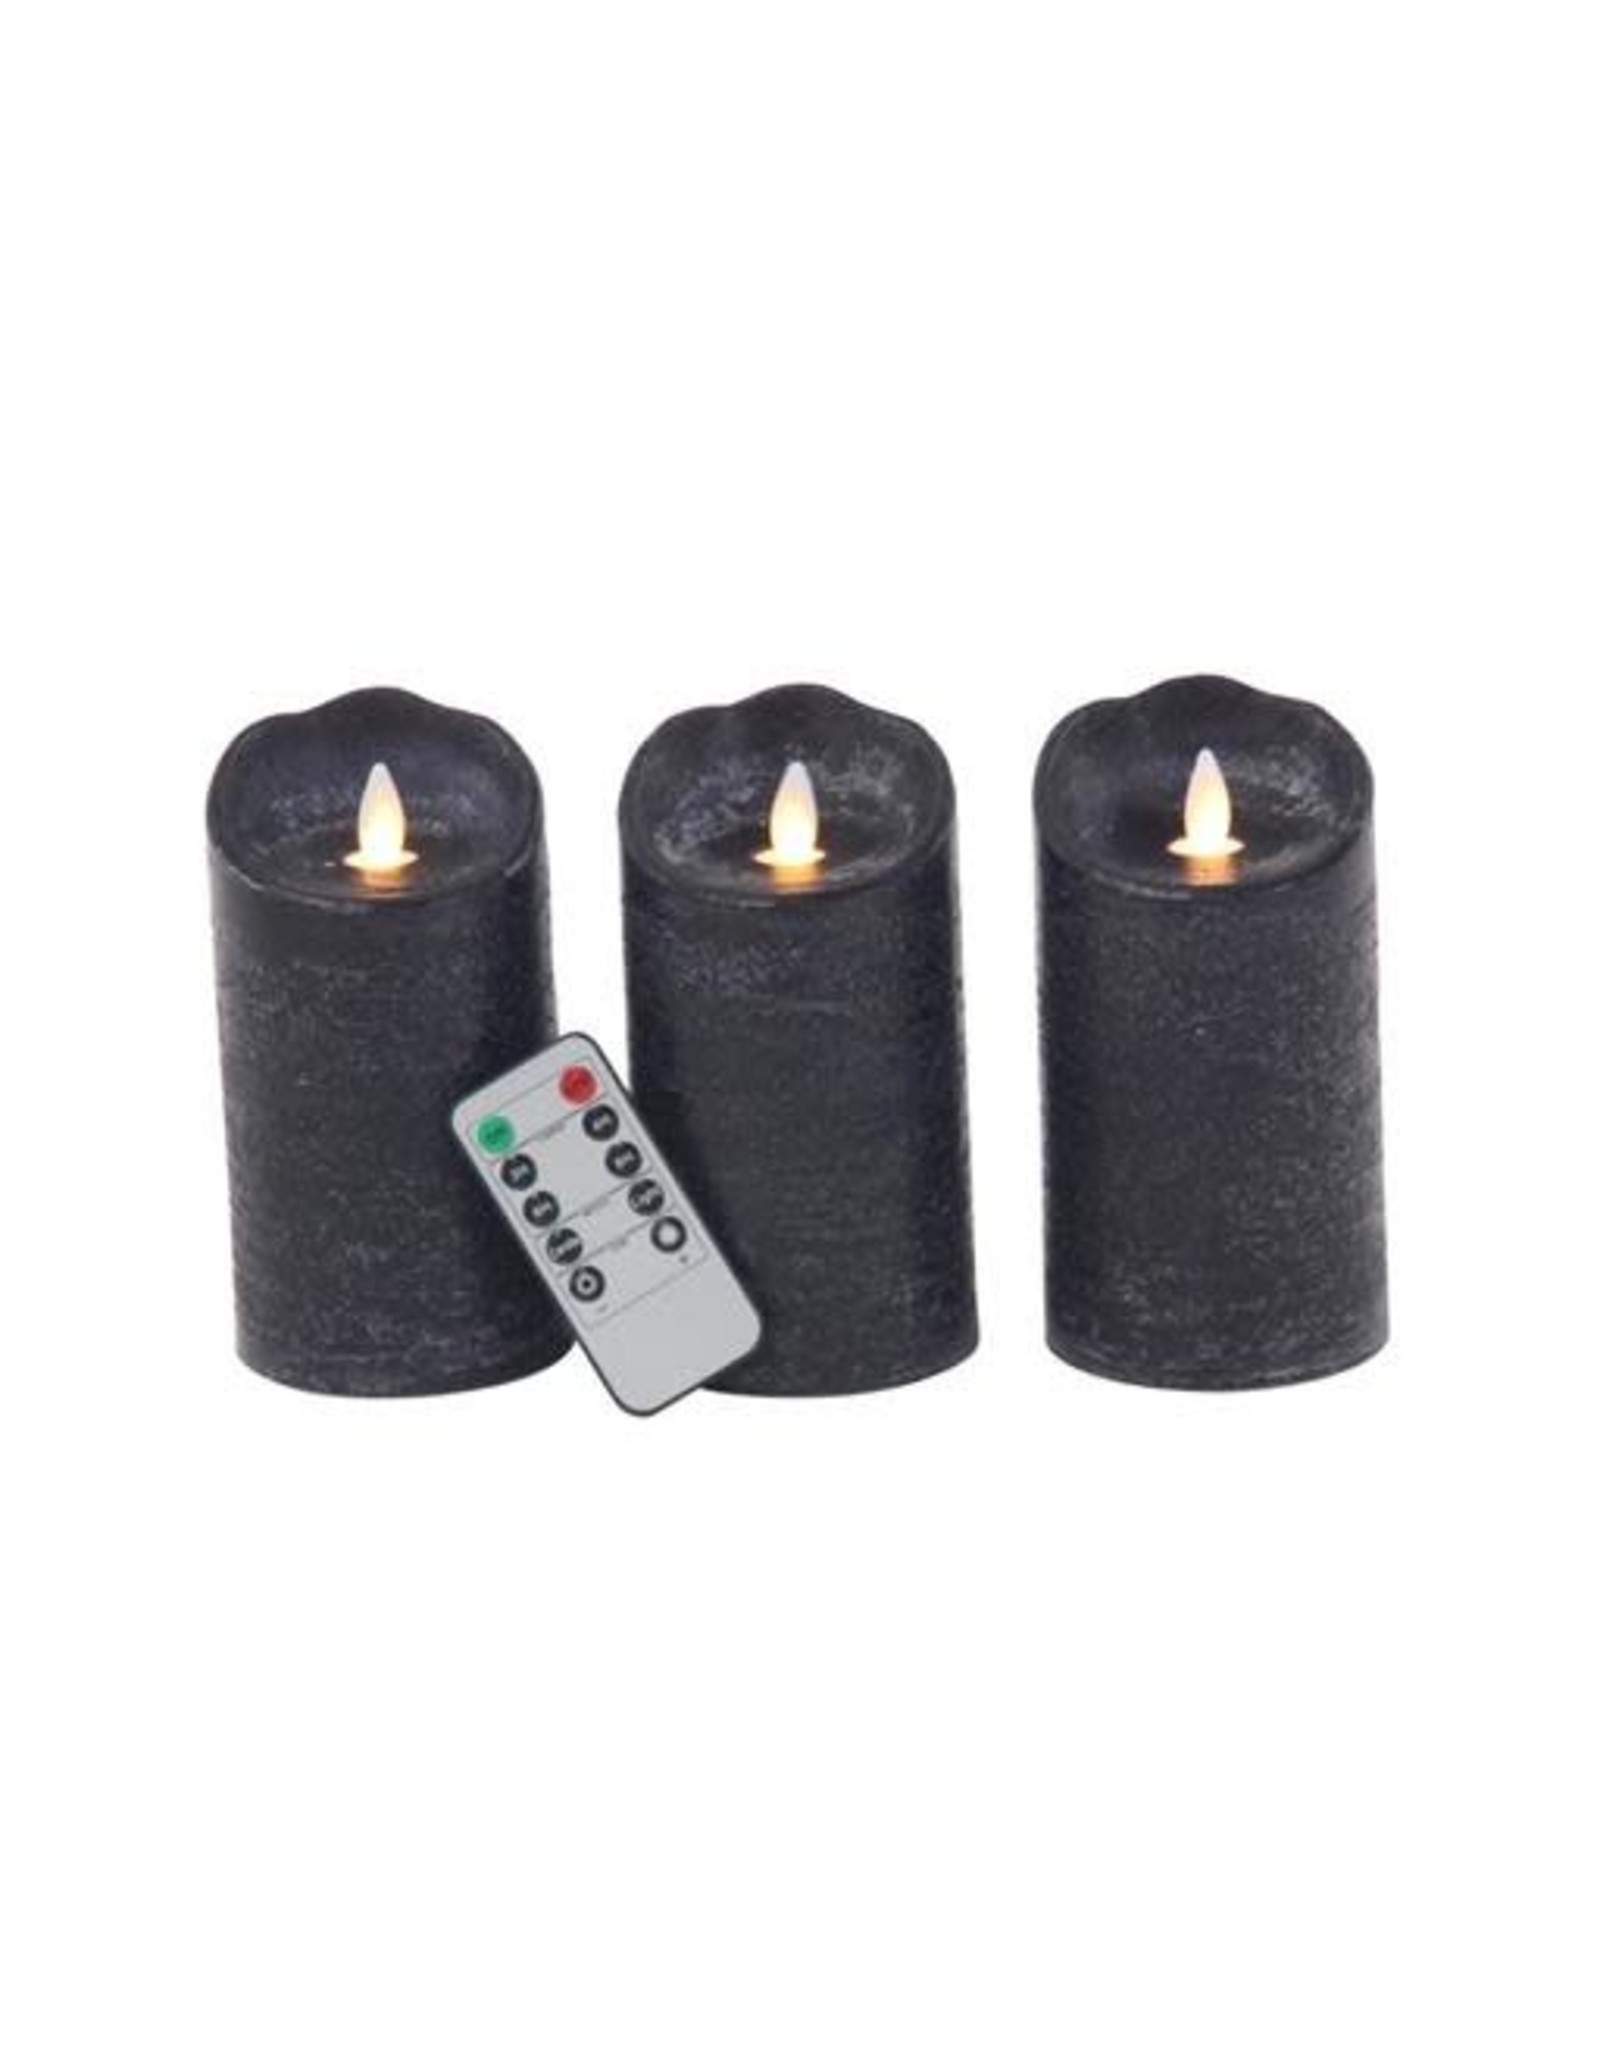 73174 Led Flicker Candle S/3 w/ remote